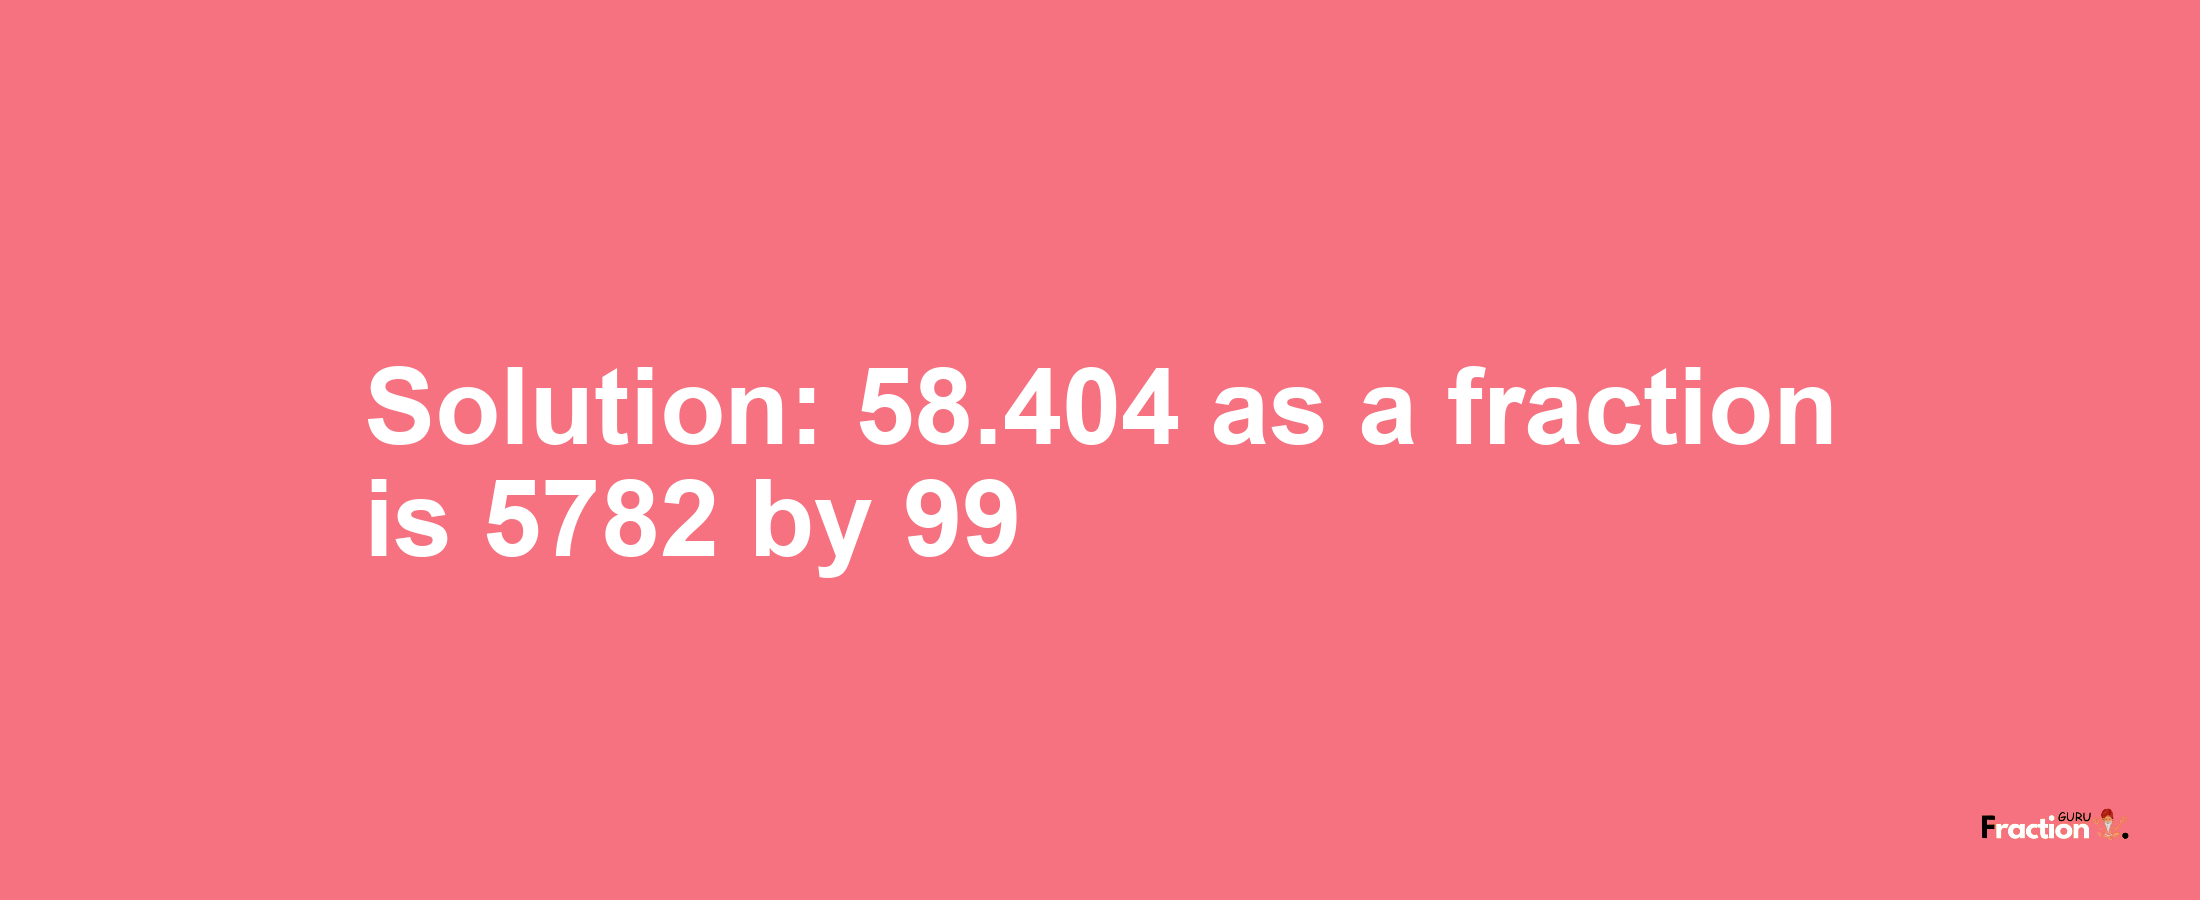 Solution:58.404 as a fraction is 5782/99